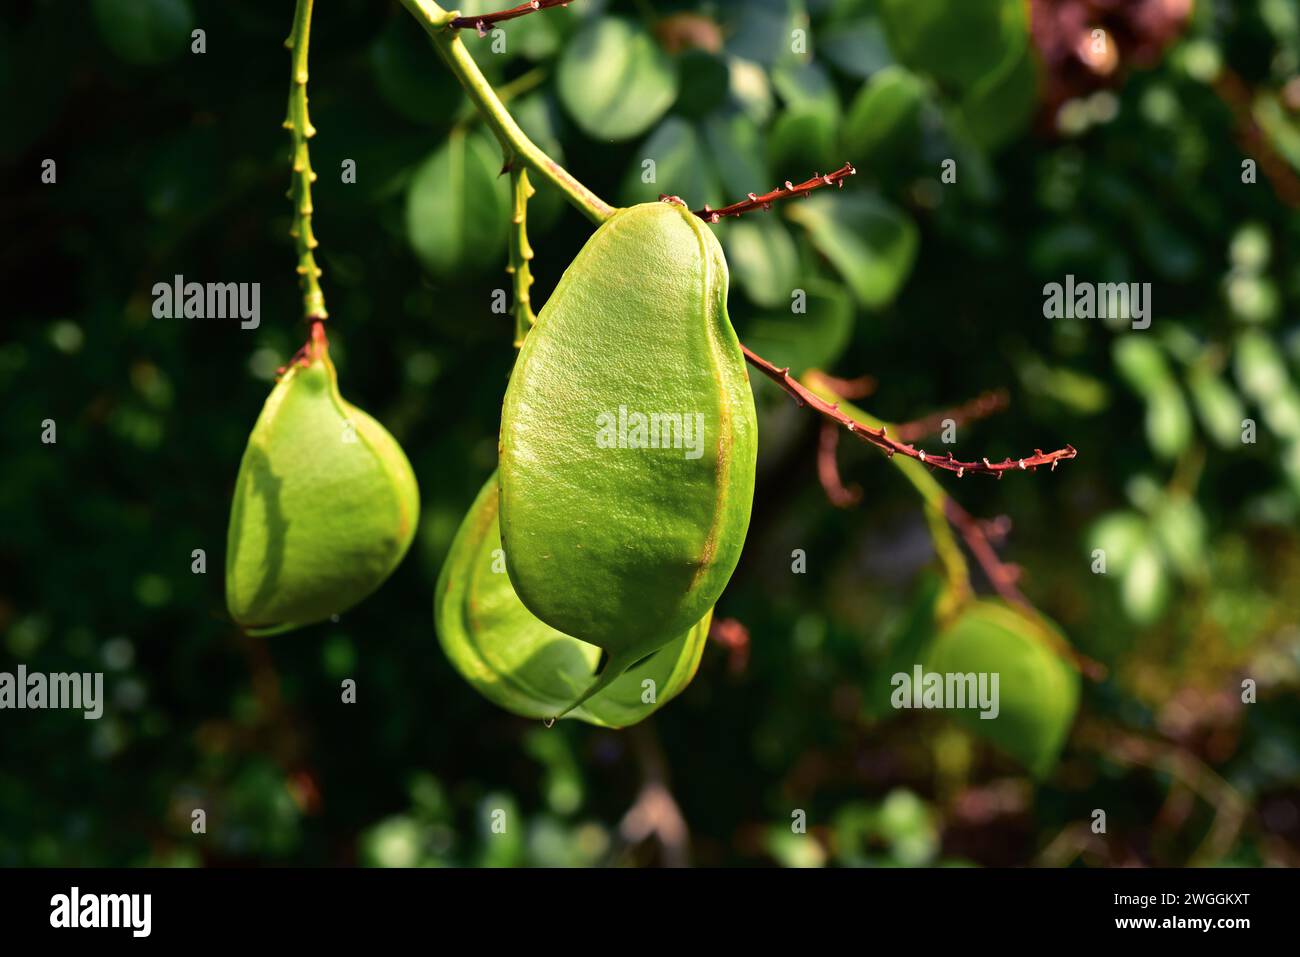 Bush boer-bean or forest boer-bean (Schotia latifolia) is an evergreen big shrub or small tree native to South Africa. Its seeds are edible. Unripe fr Stock Photo